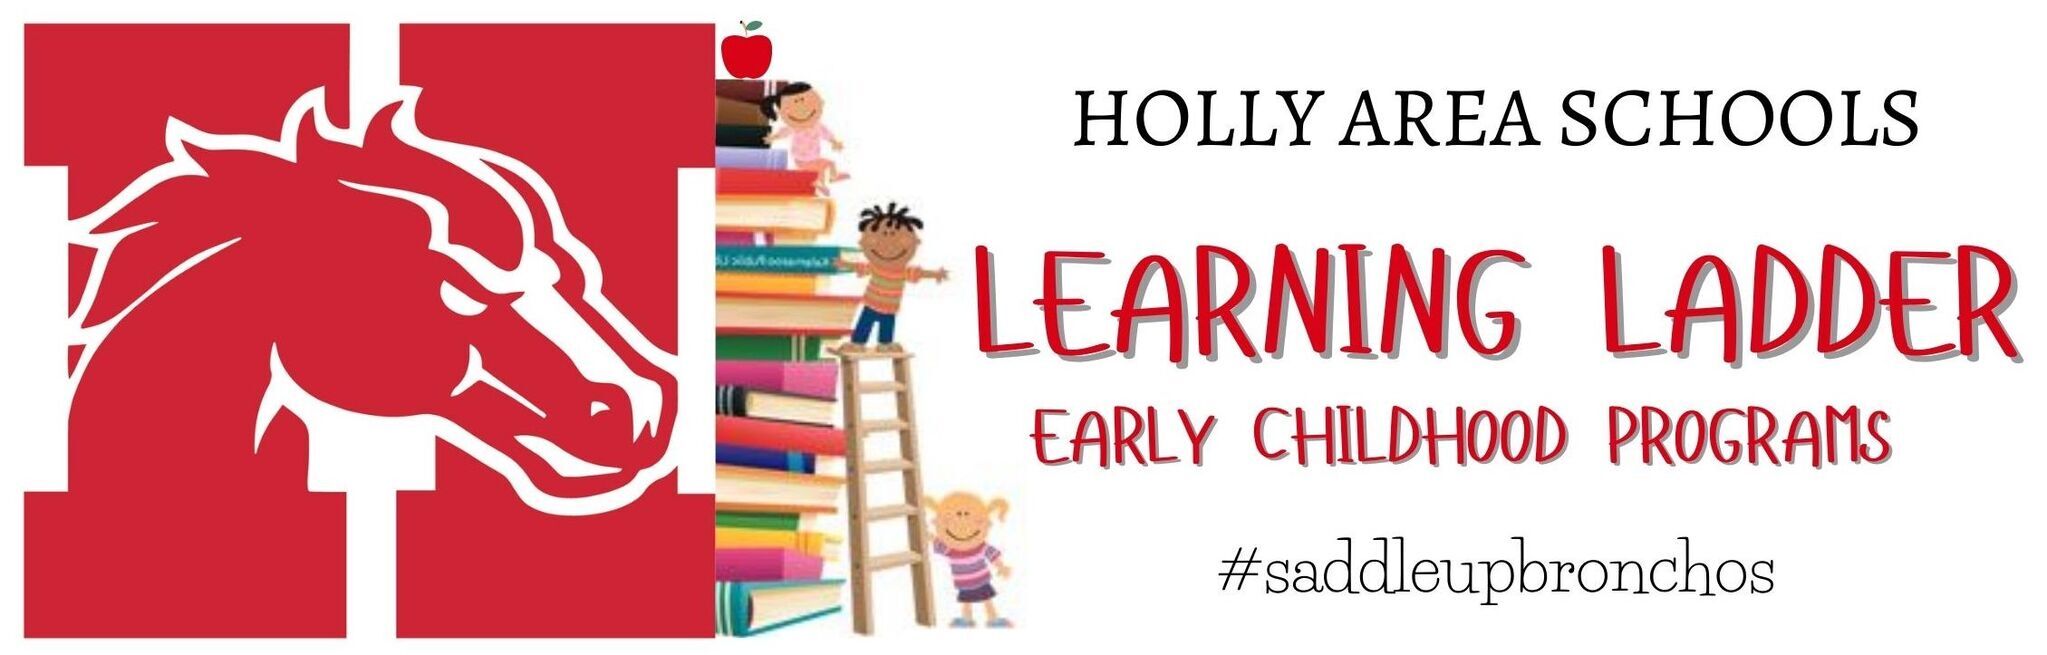 Learning Ladder - Early Childhood Programs